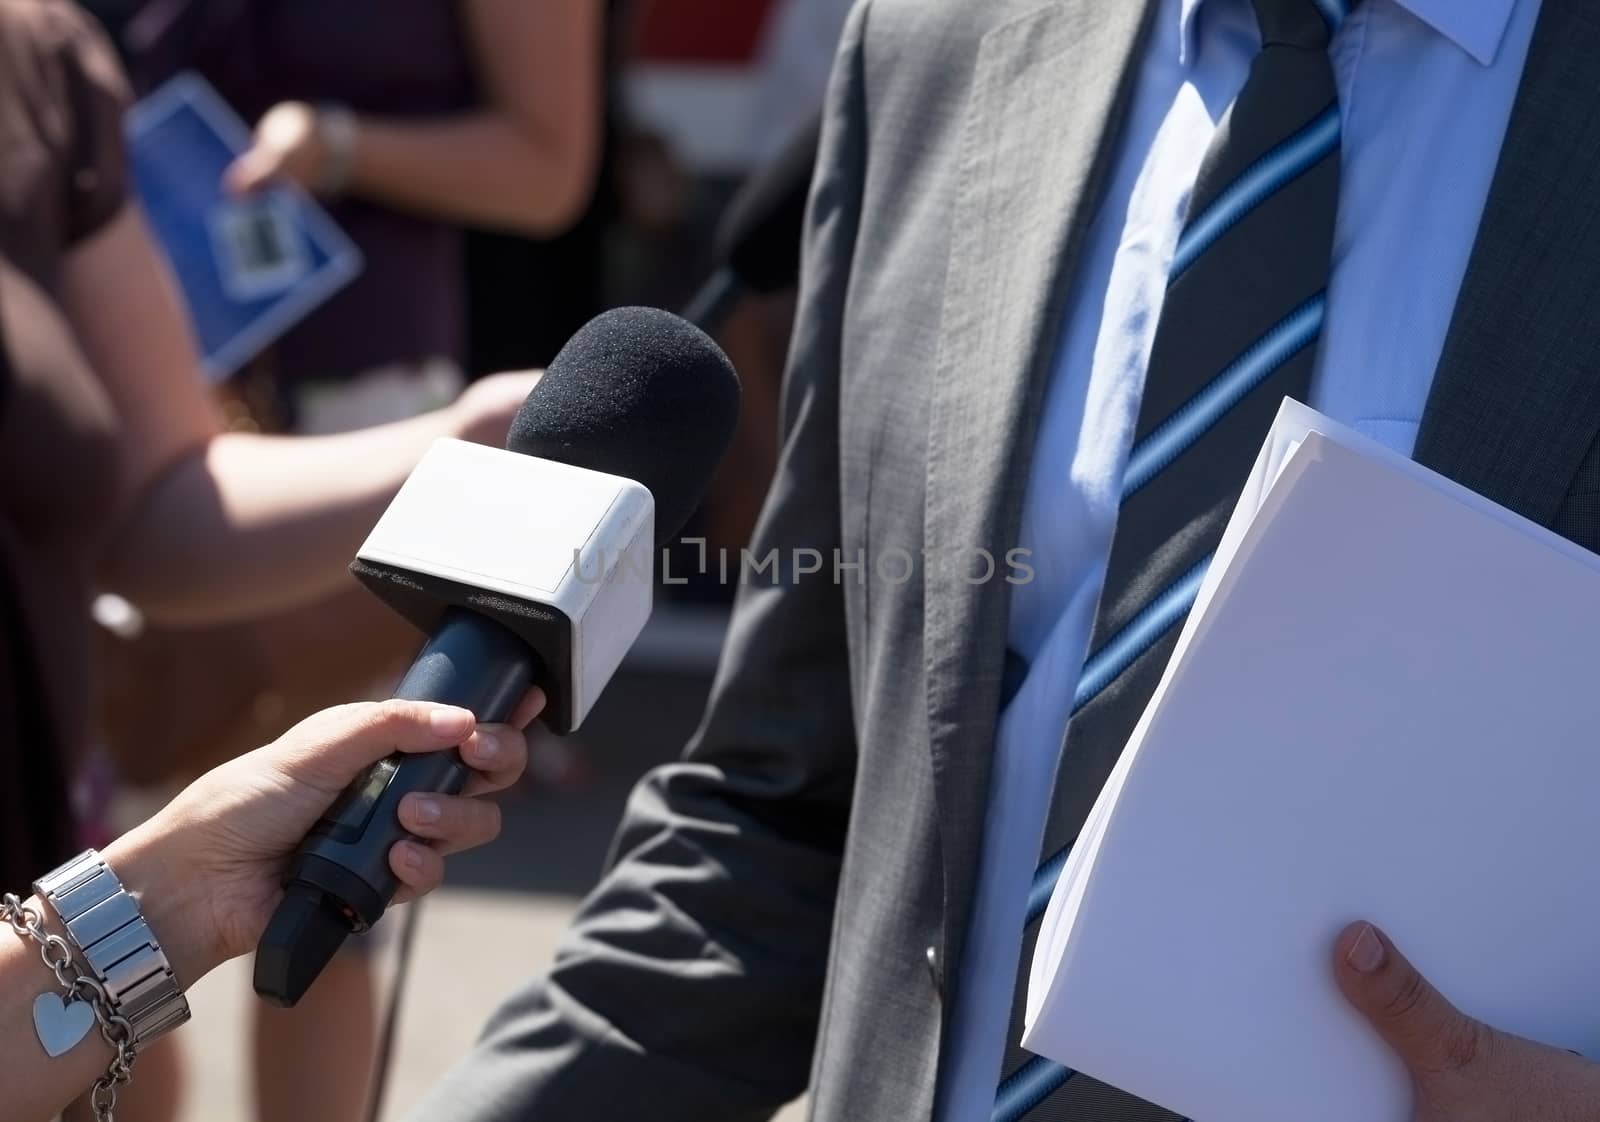 Journalist making media interview with unrecognizable politician or businessman